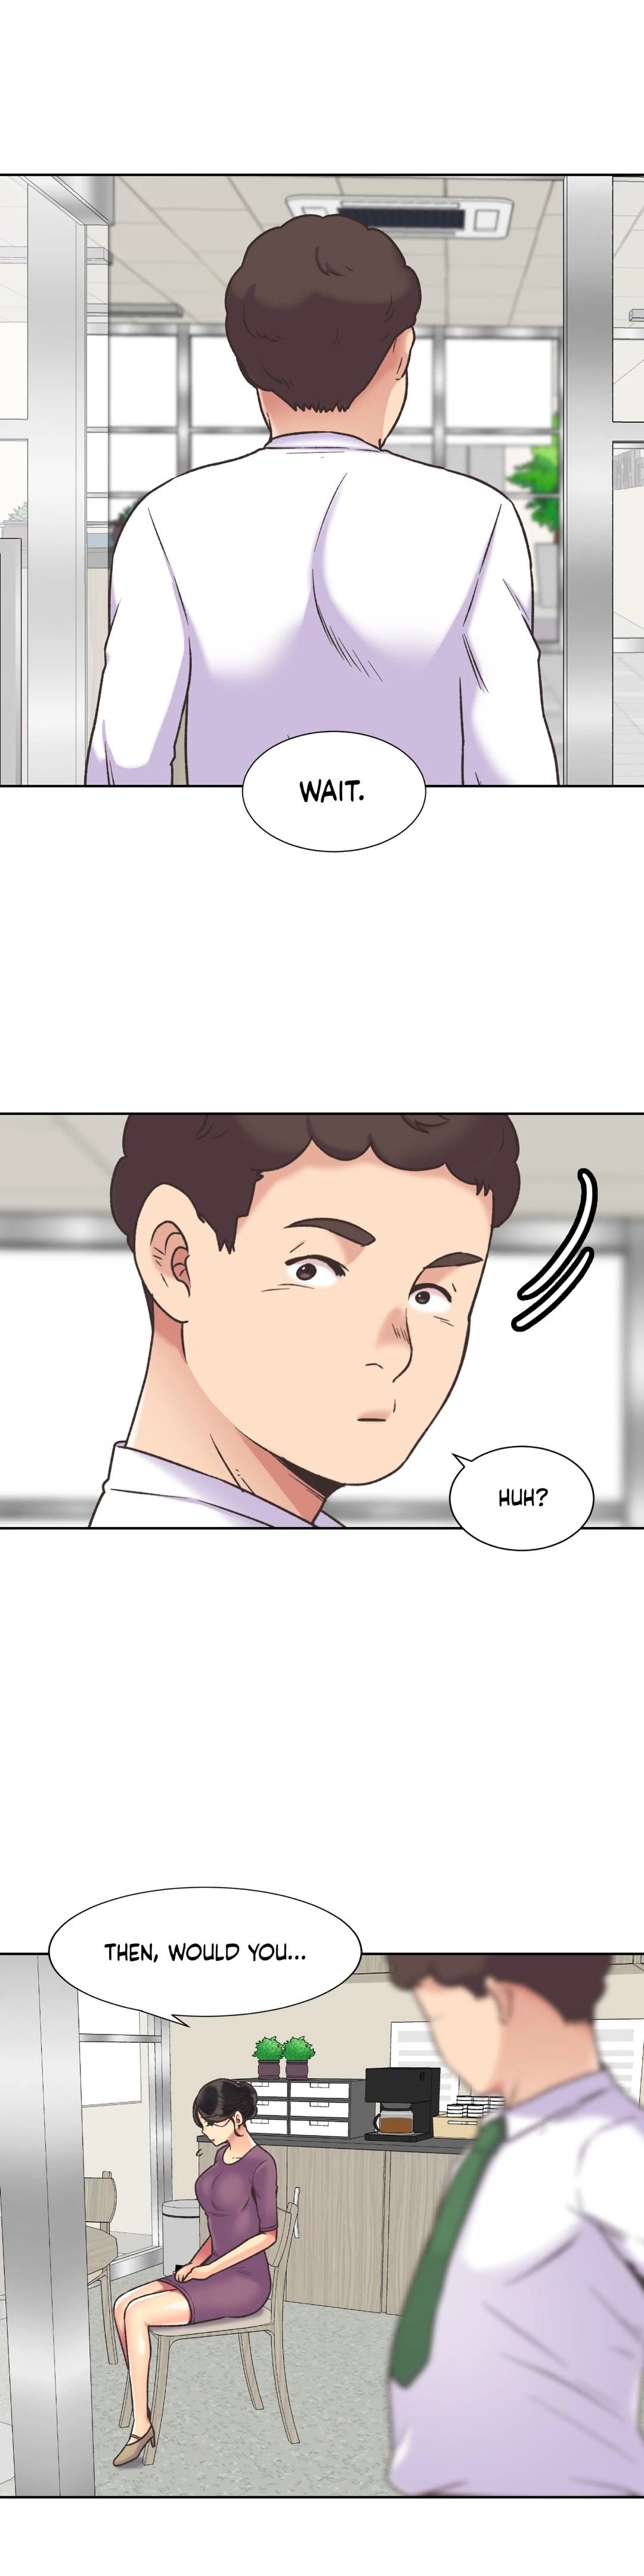 the-yes-girl-chap-39-11